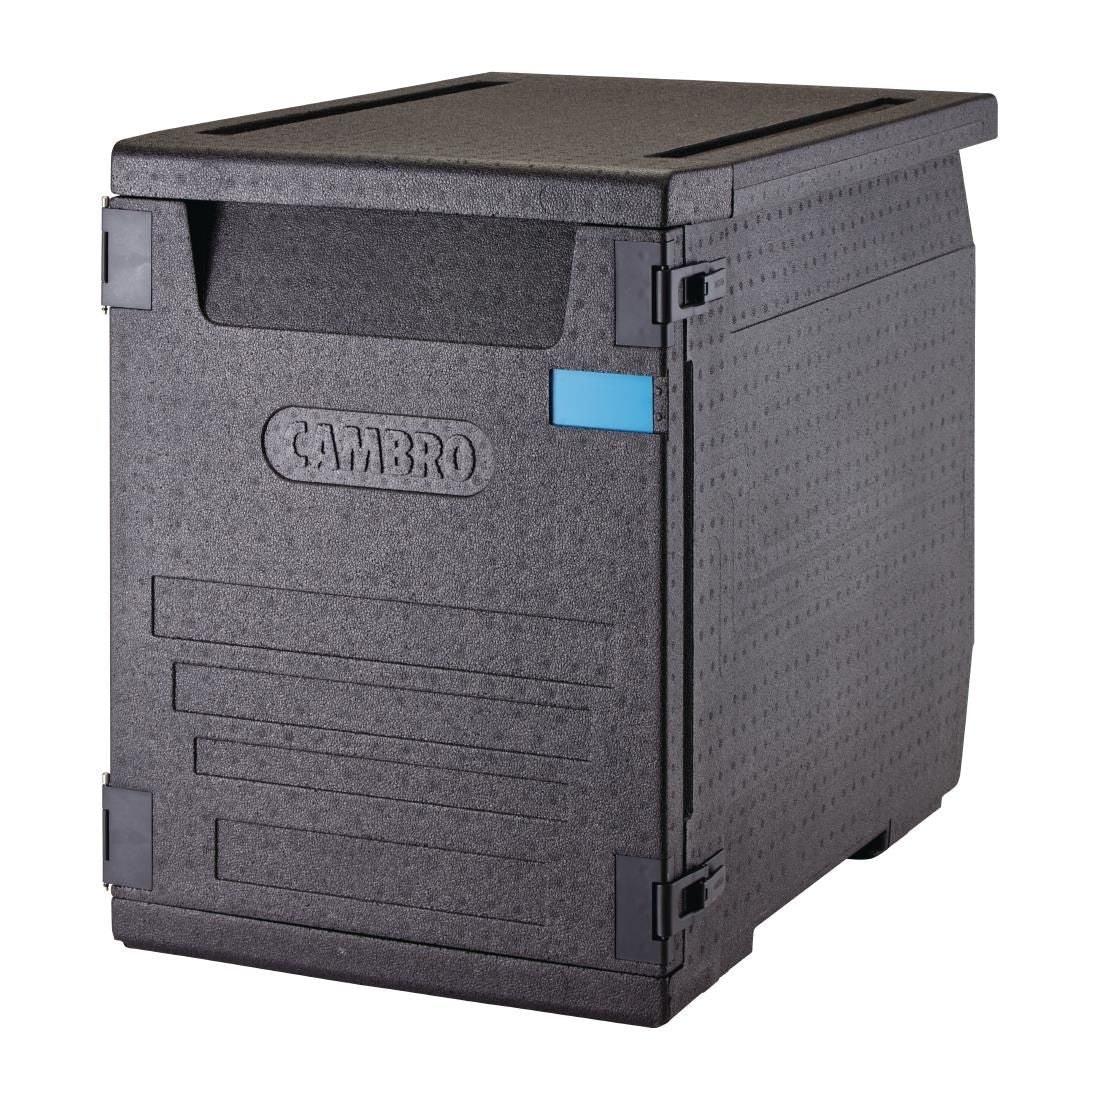 Cambro Insulated Front Loading Food Pan Carrier 126 Litre with 6 Rails JD Catering Equipment Solutions Ltd